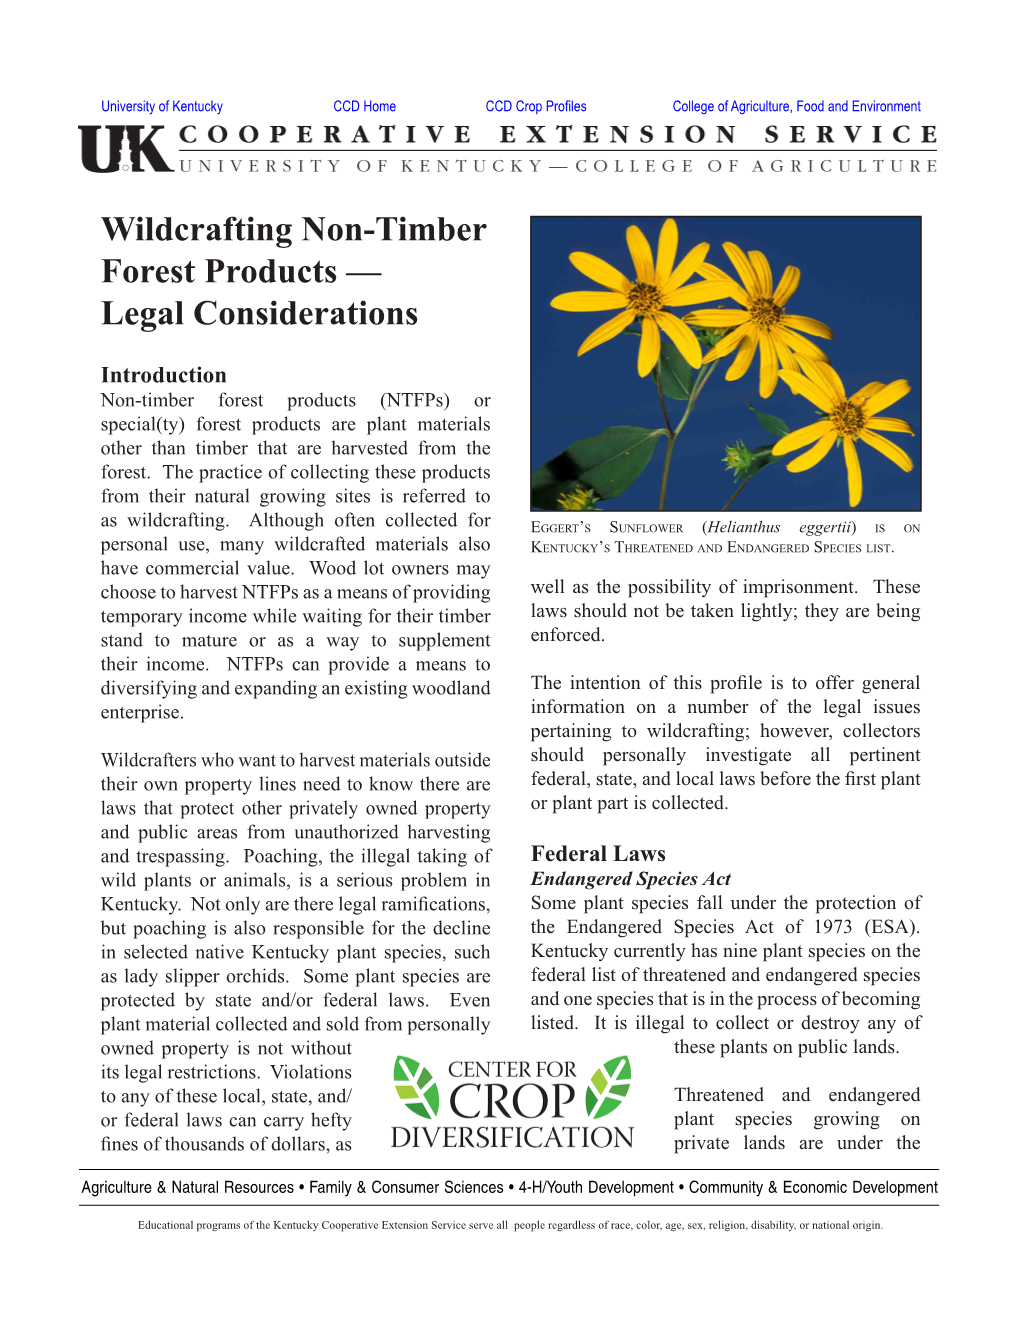 Wildcrafting Non-Timber Forest Products — Legal Considerations